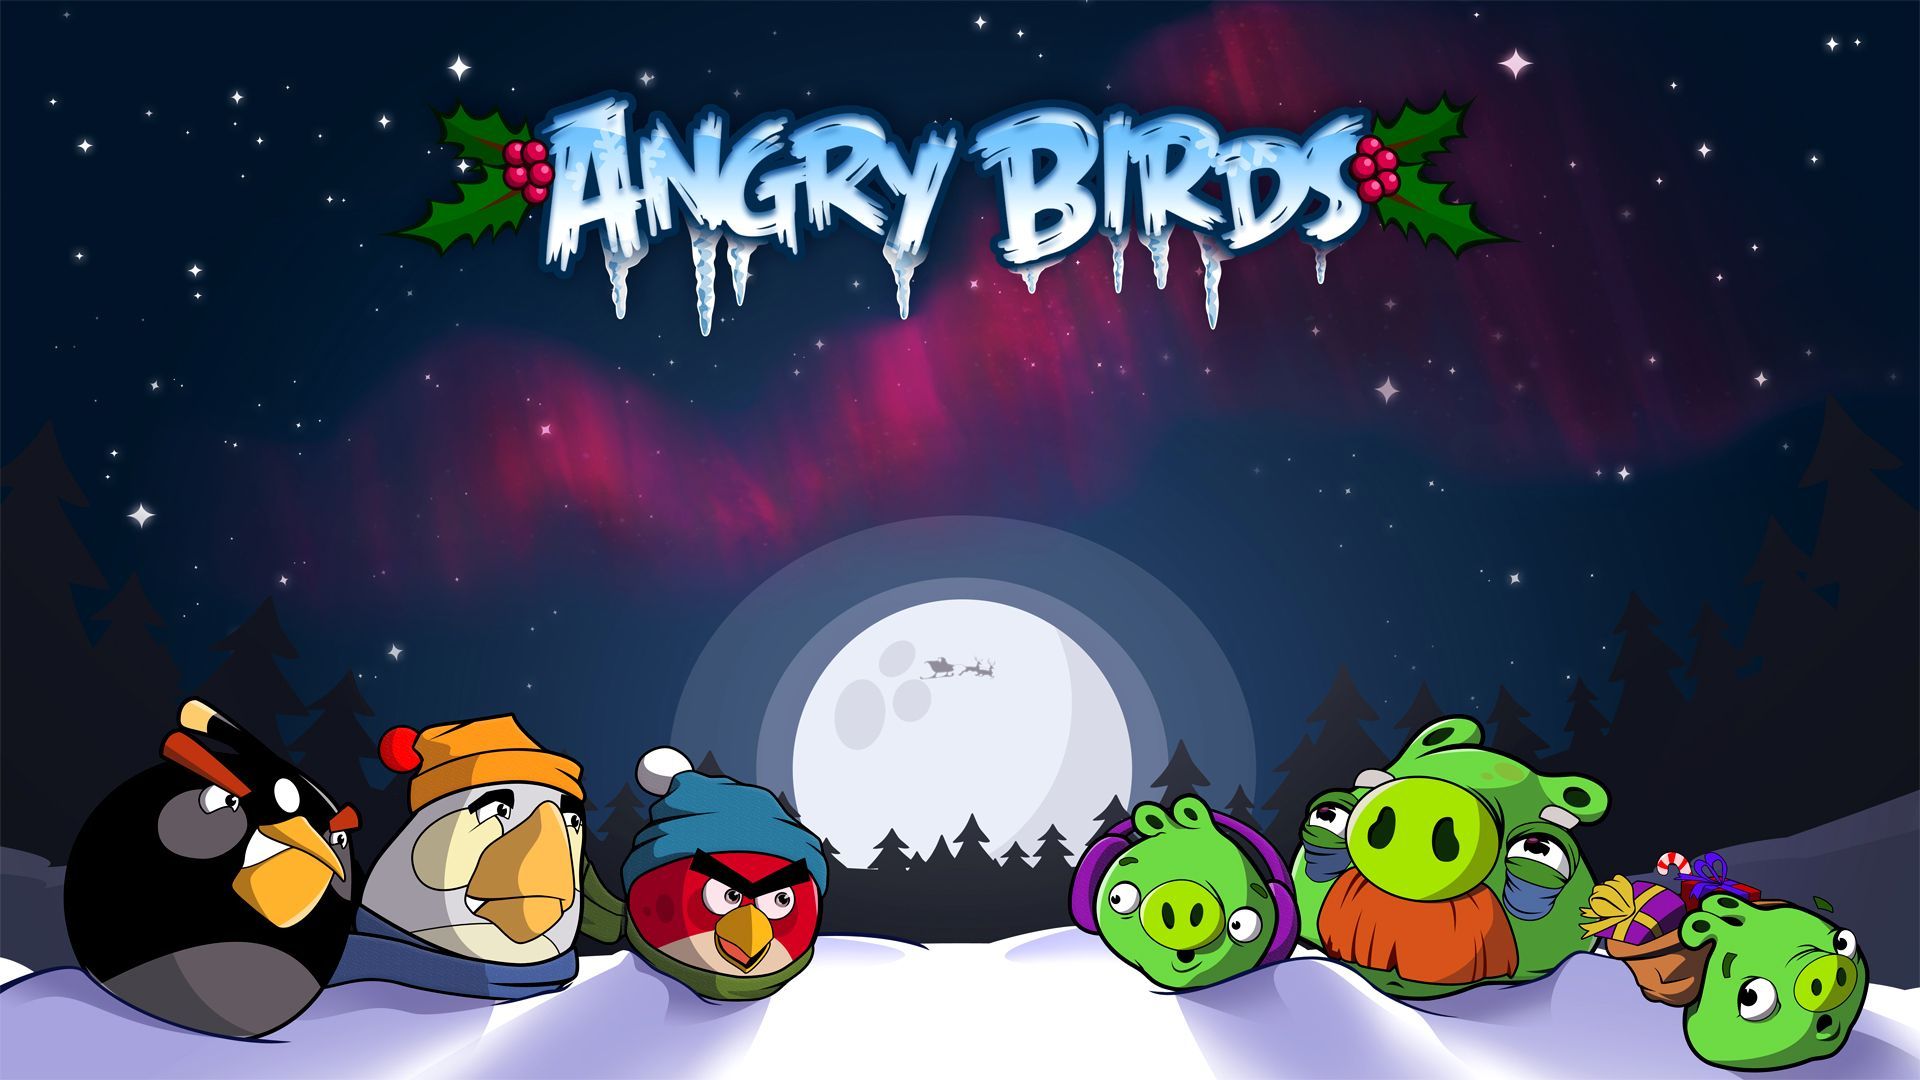 Ultimate Collection of Angry Birds Desktop Wallpaper and Photo 1920x1080. Angry birds seasons, Angry birds, Angry birds characters